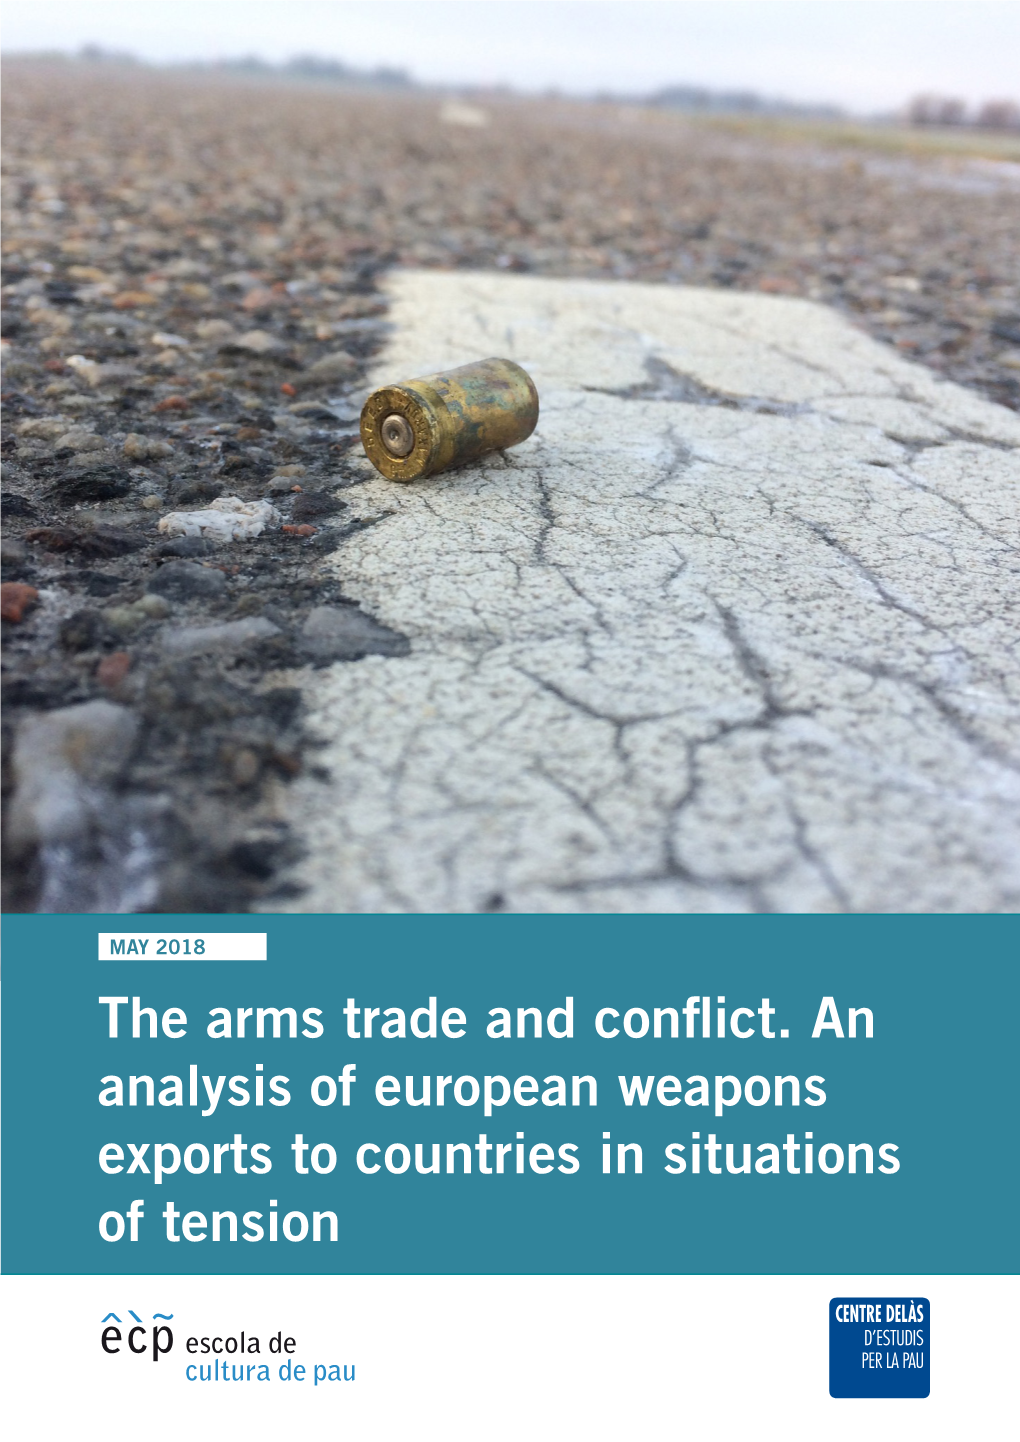 The Arms Trade and Conflict. an Analysis of European Weapons Exports to Countries in Situations of Tension